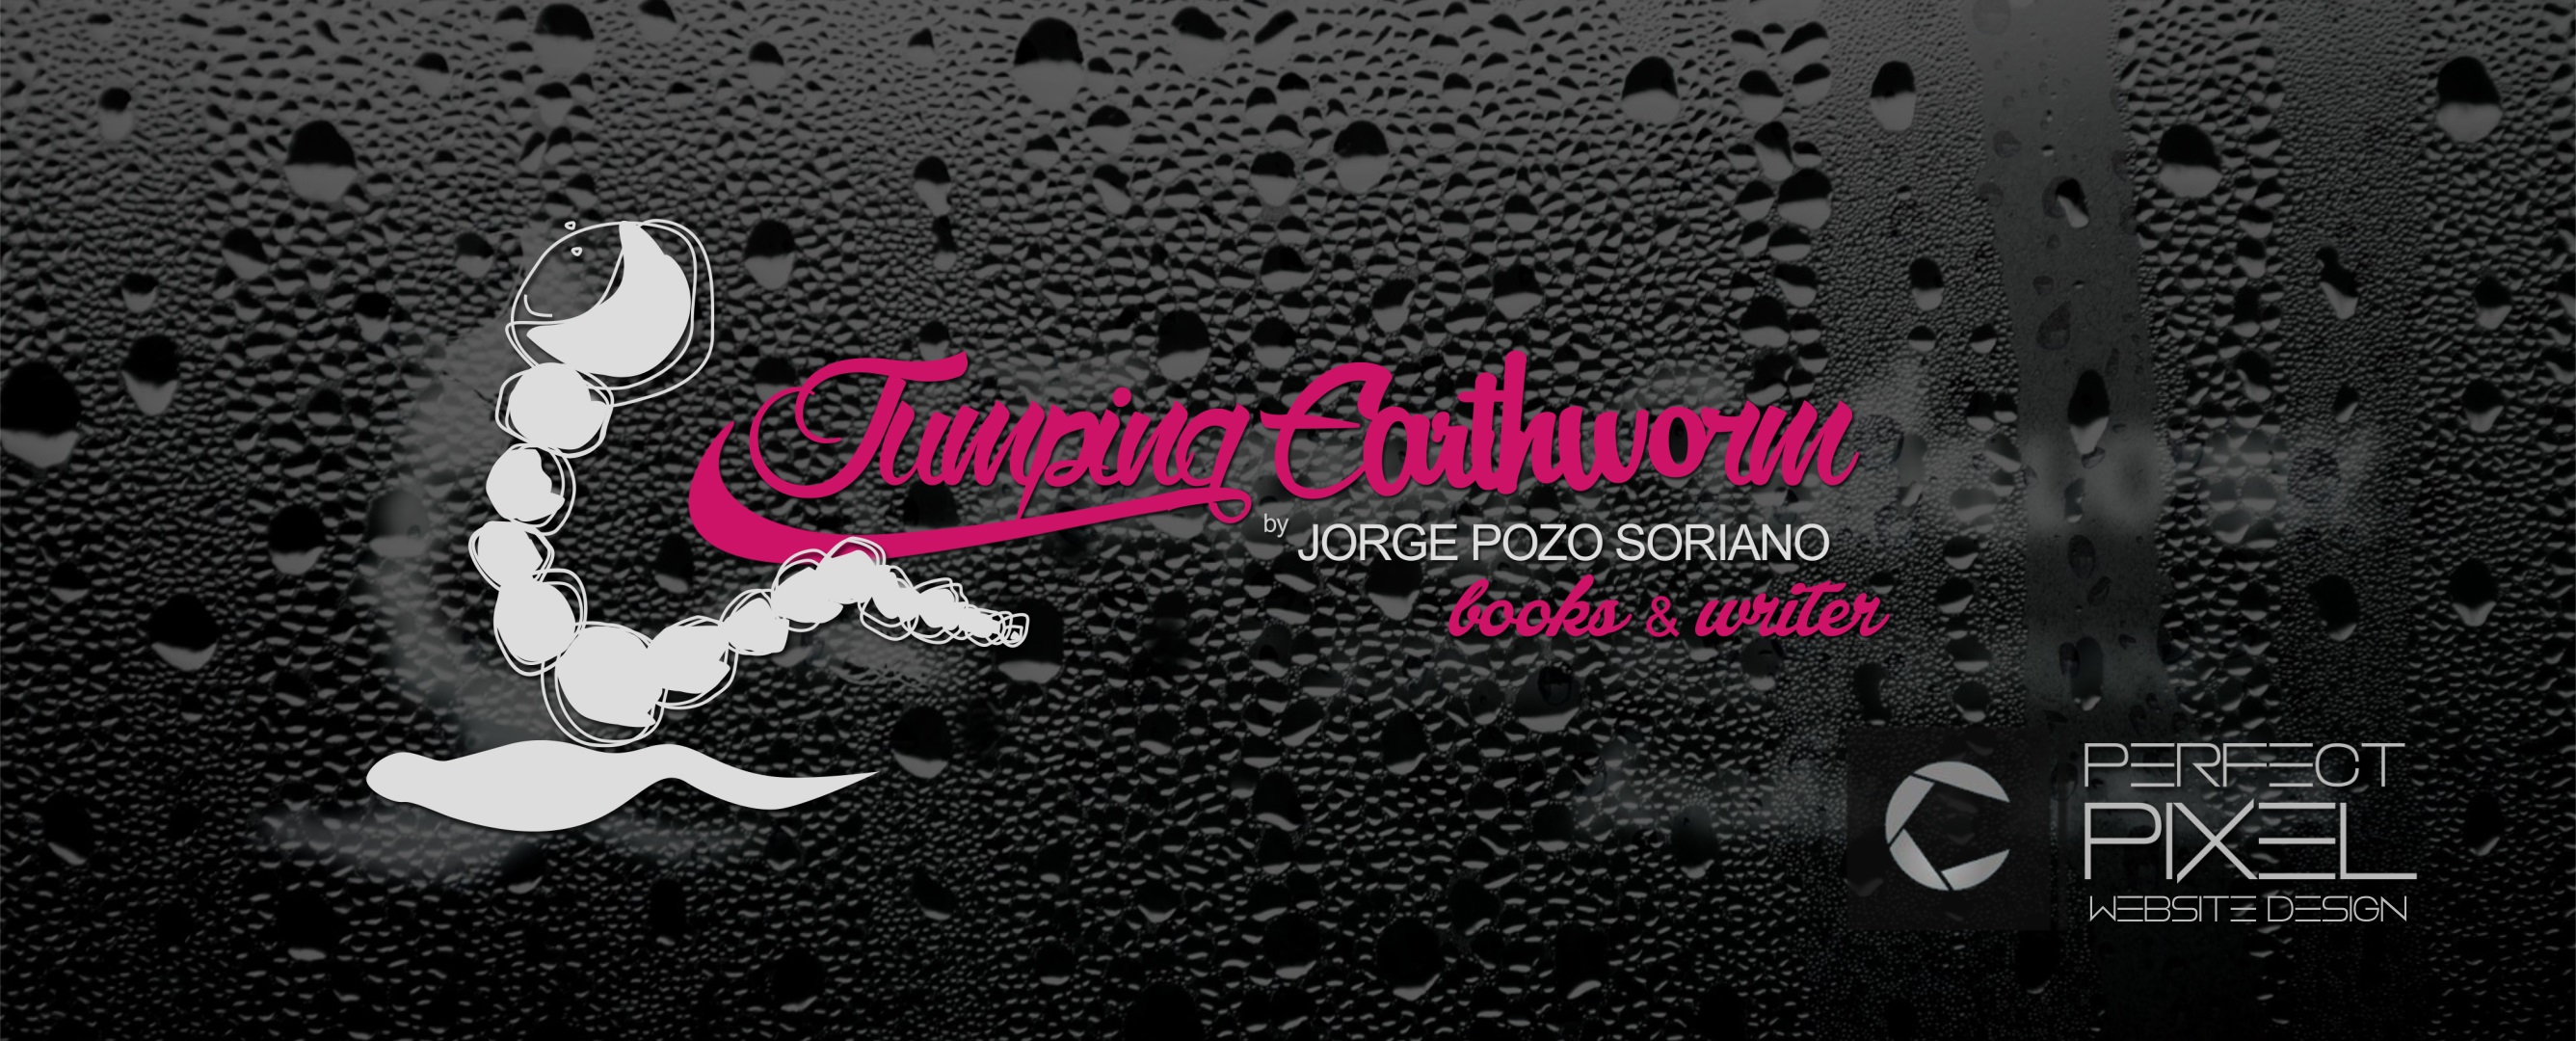 Jumper Earthworm by Jorge Pozo Soriano (Books & Writer) - Website and Corporate Image Design